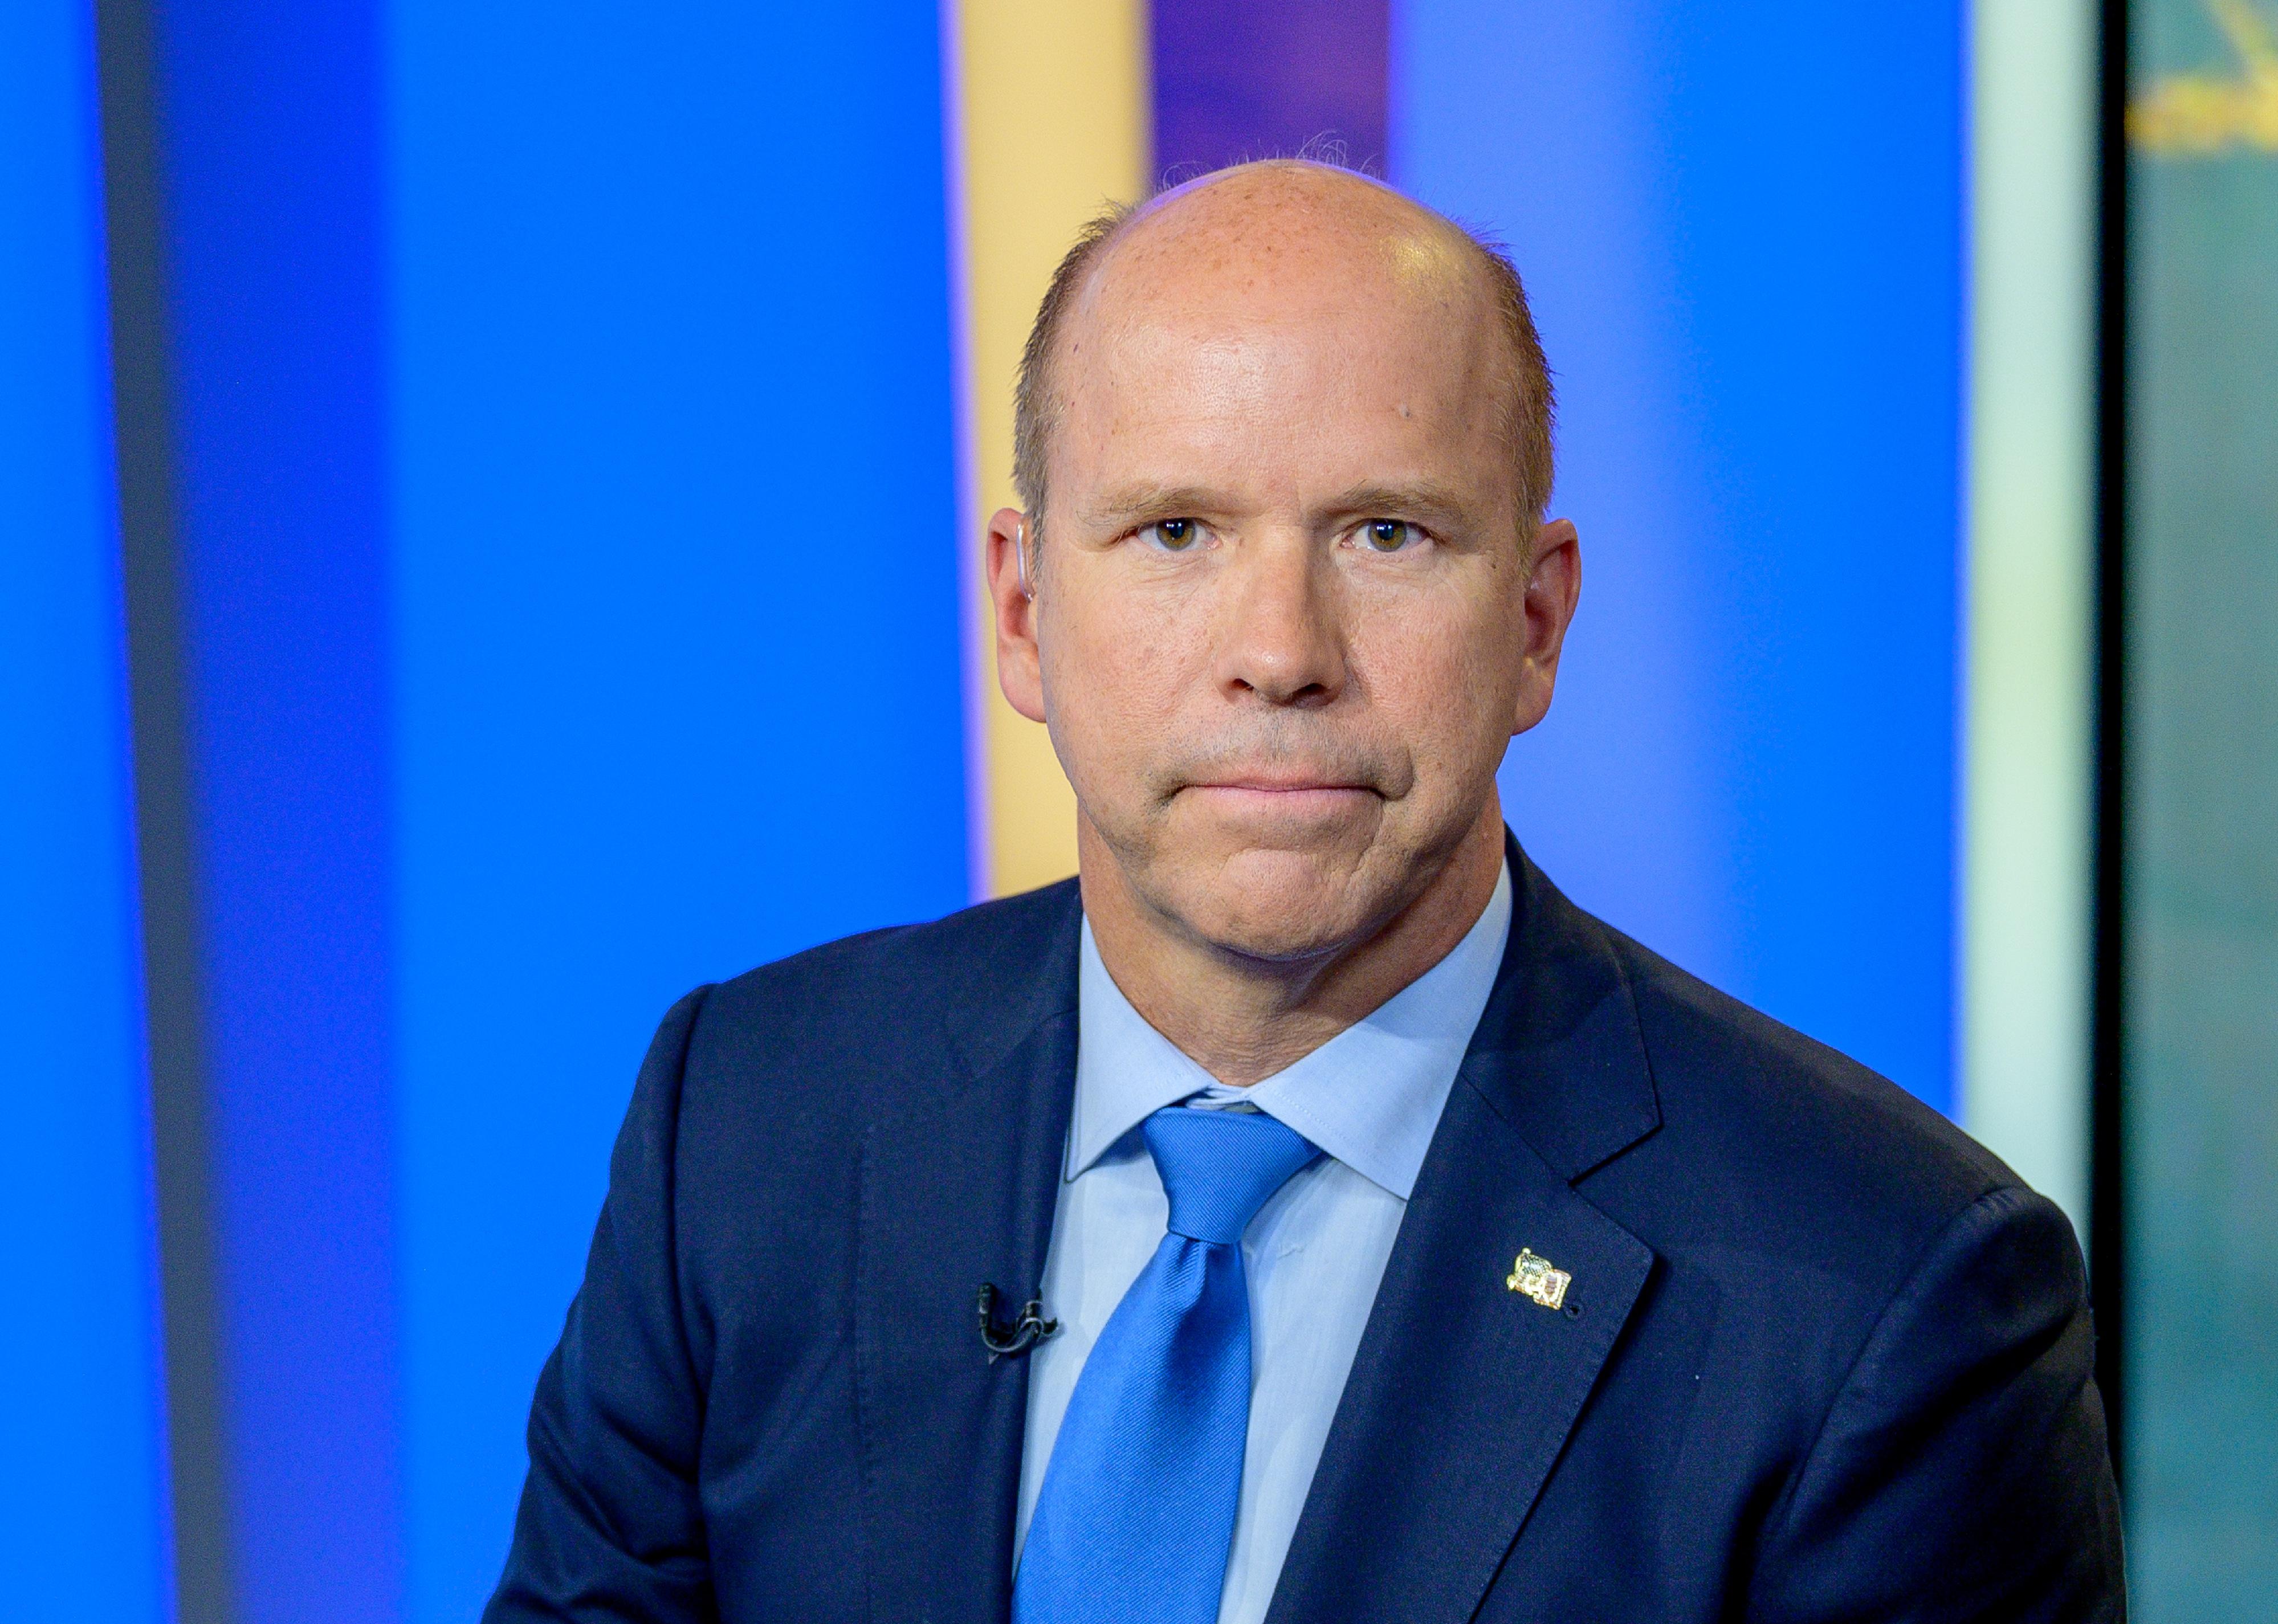 John Delaney in a suit at a news studio.